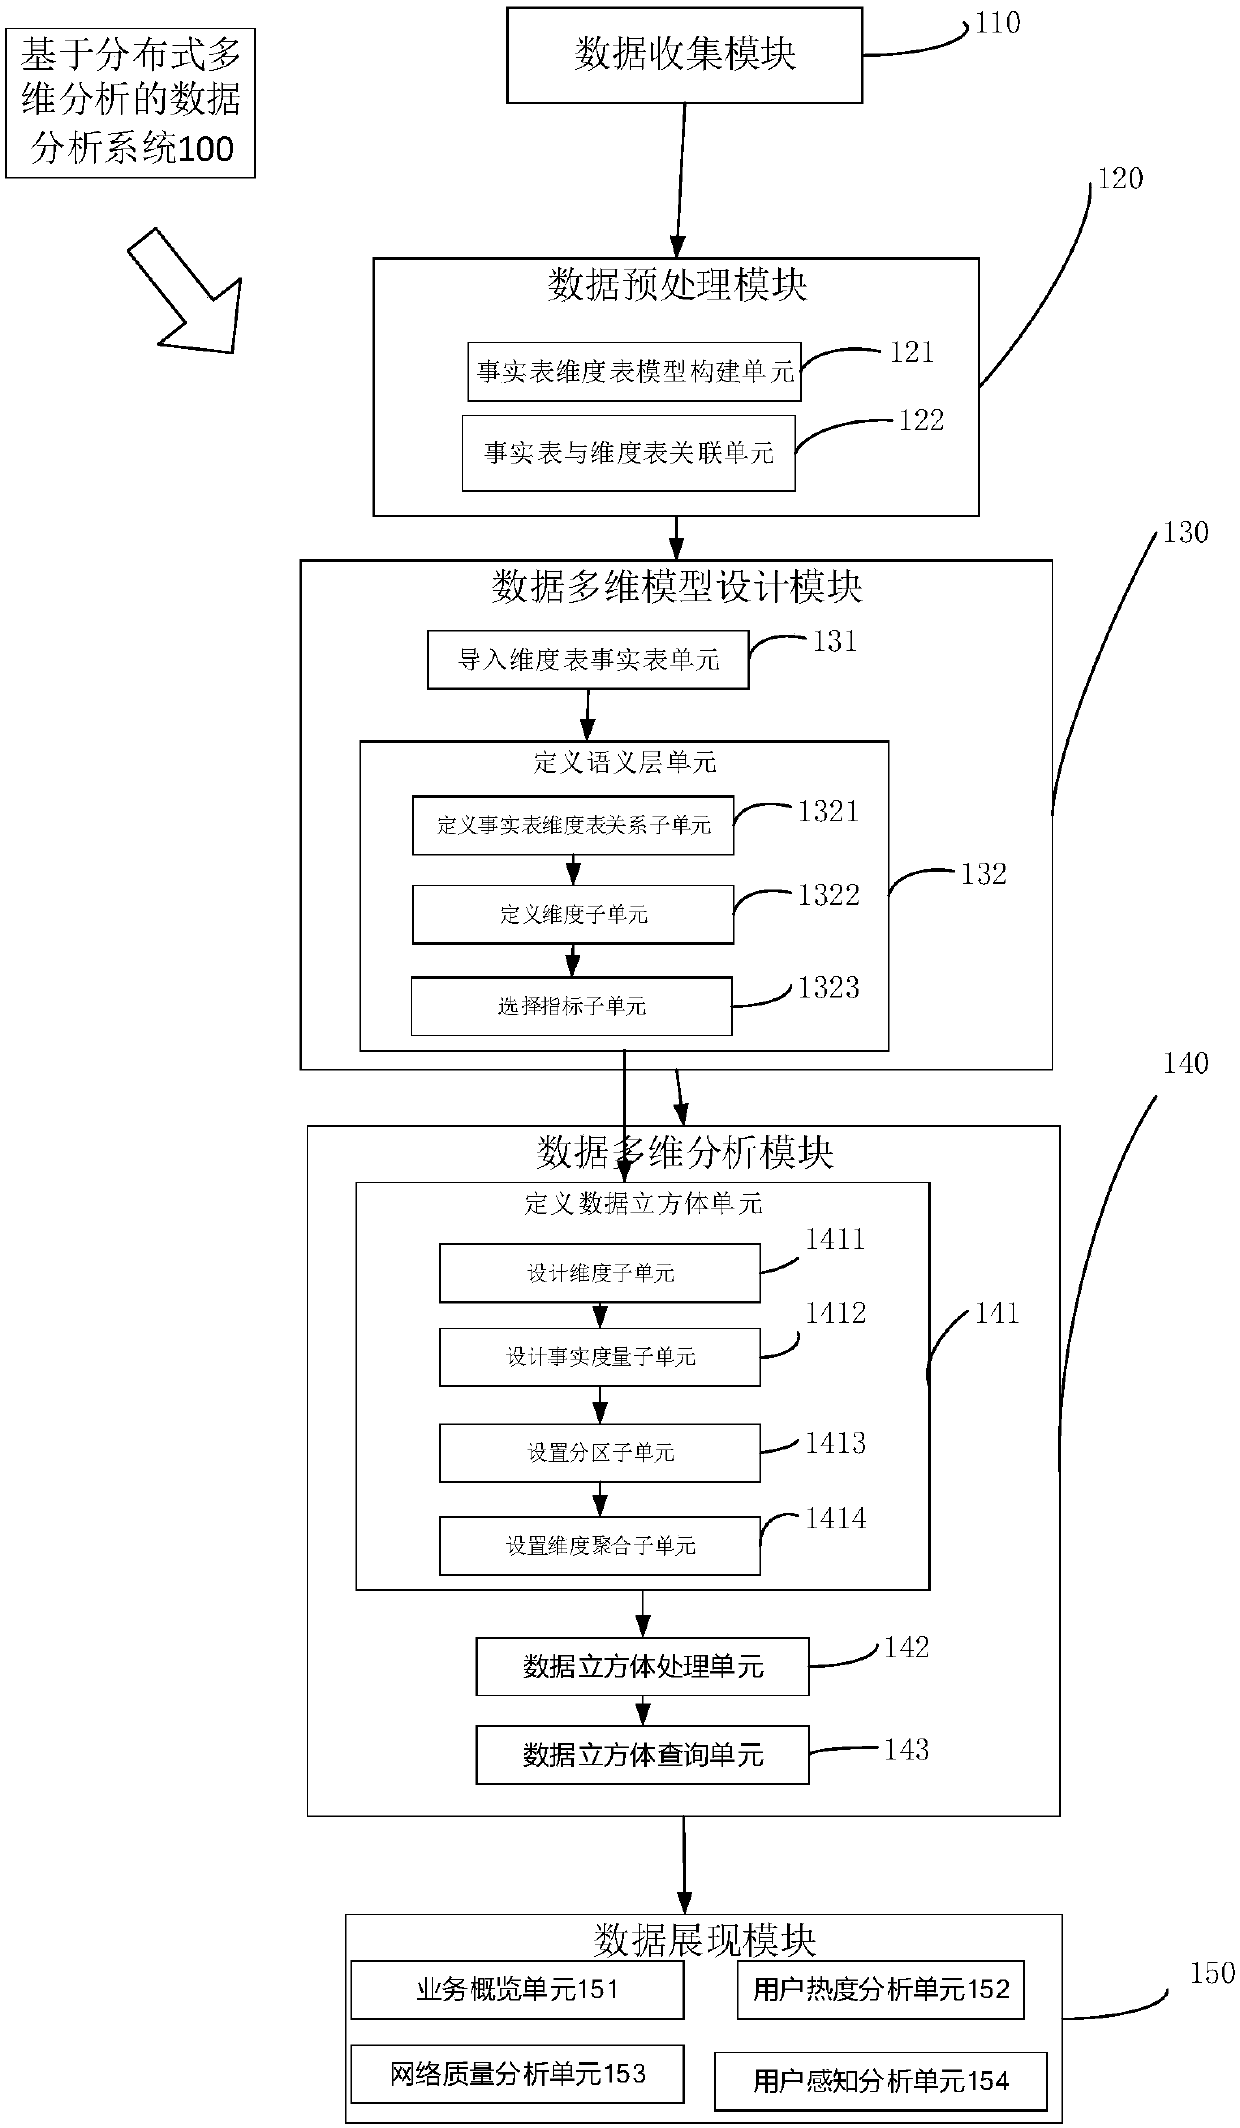 Data analysis system and method based on distributed multi-dimensional analysis